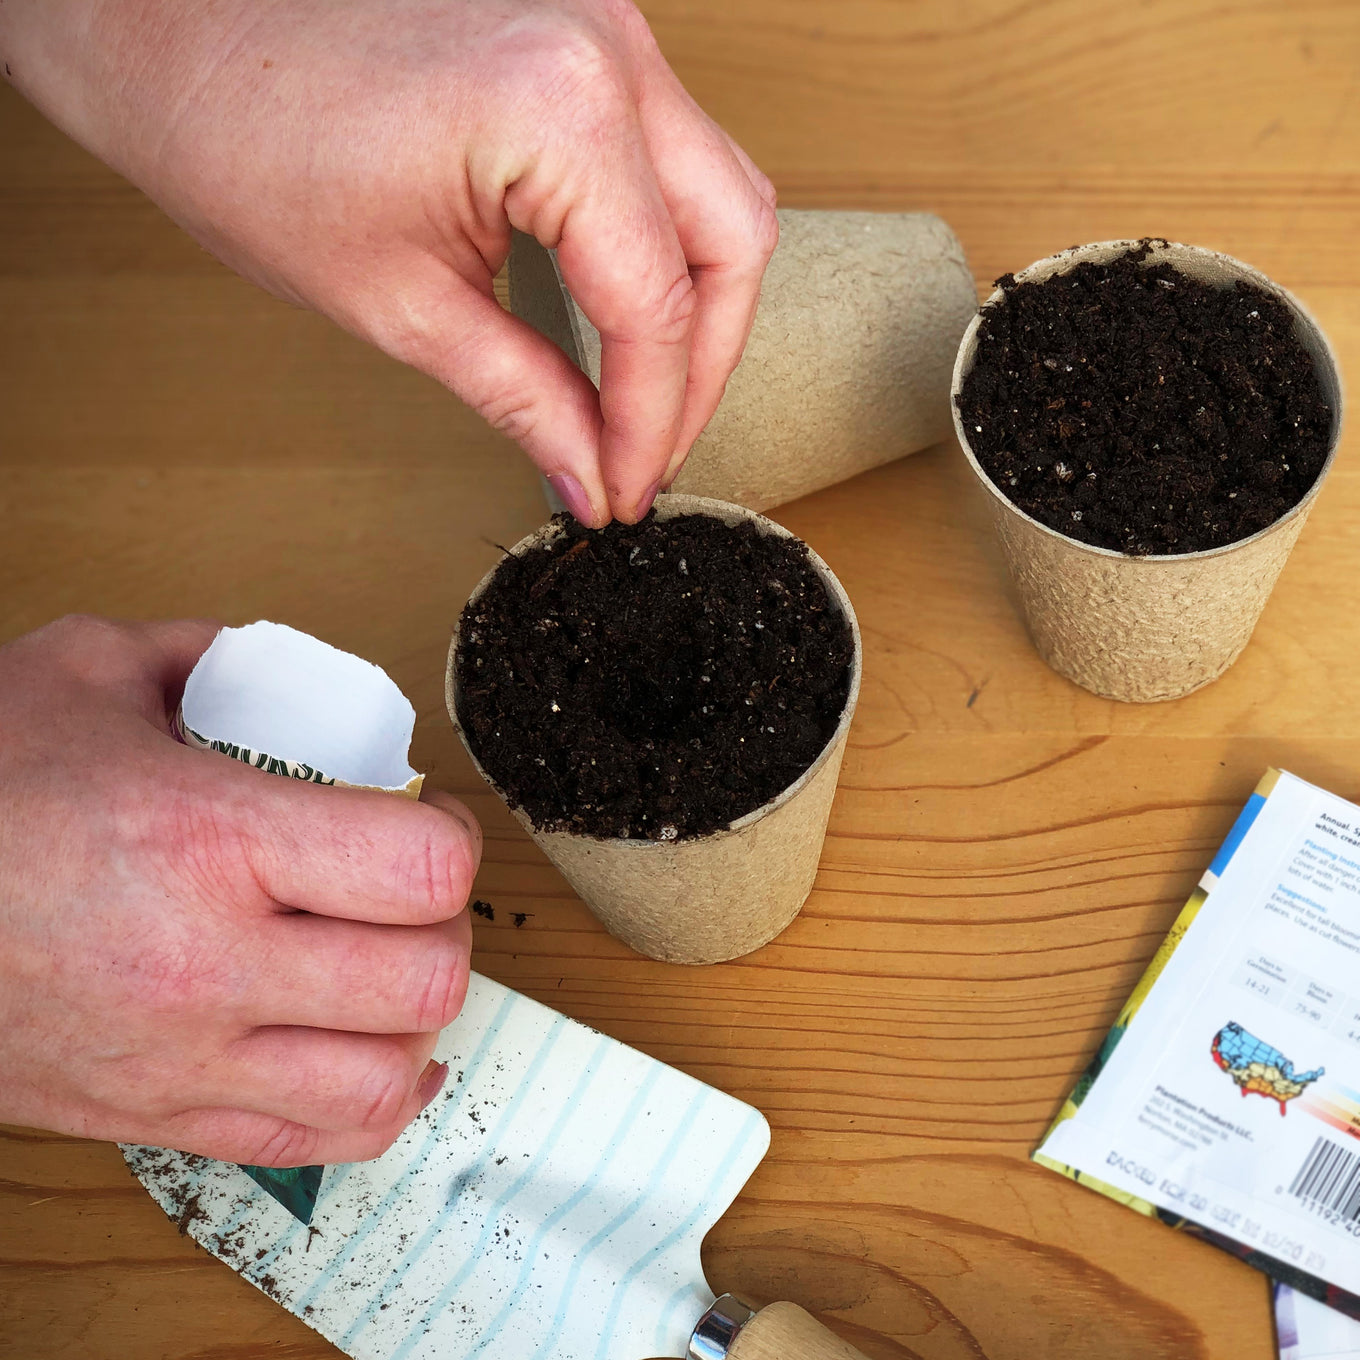 Sowing Catskill Brussels Sprouts Seeds into Jiffy biodegradable peat pots filled with seed starting mix.